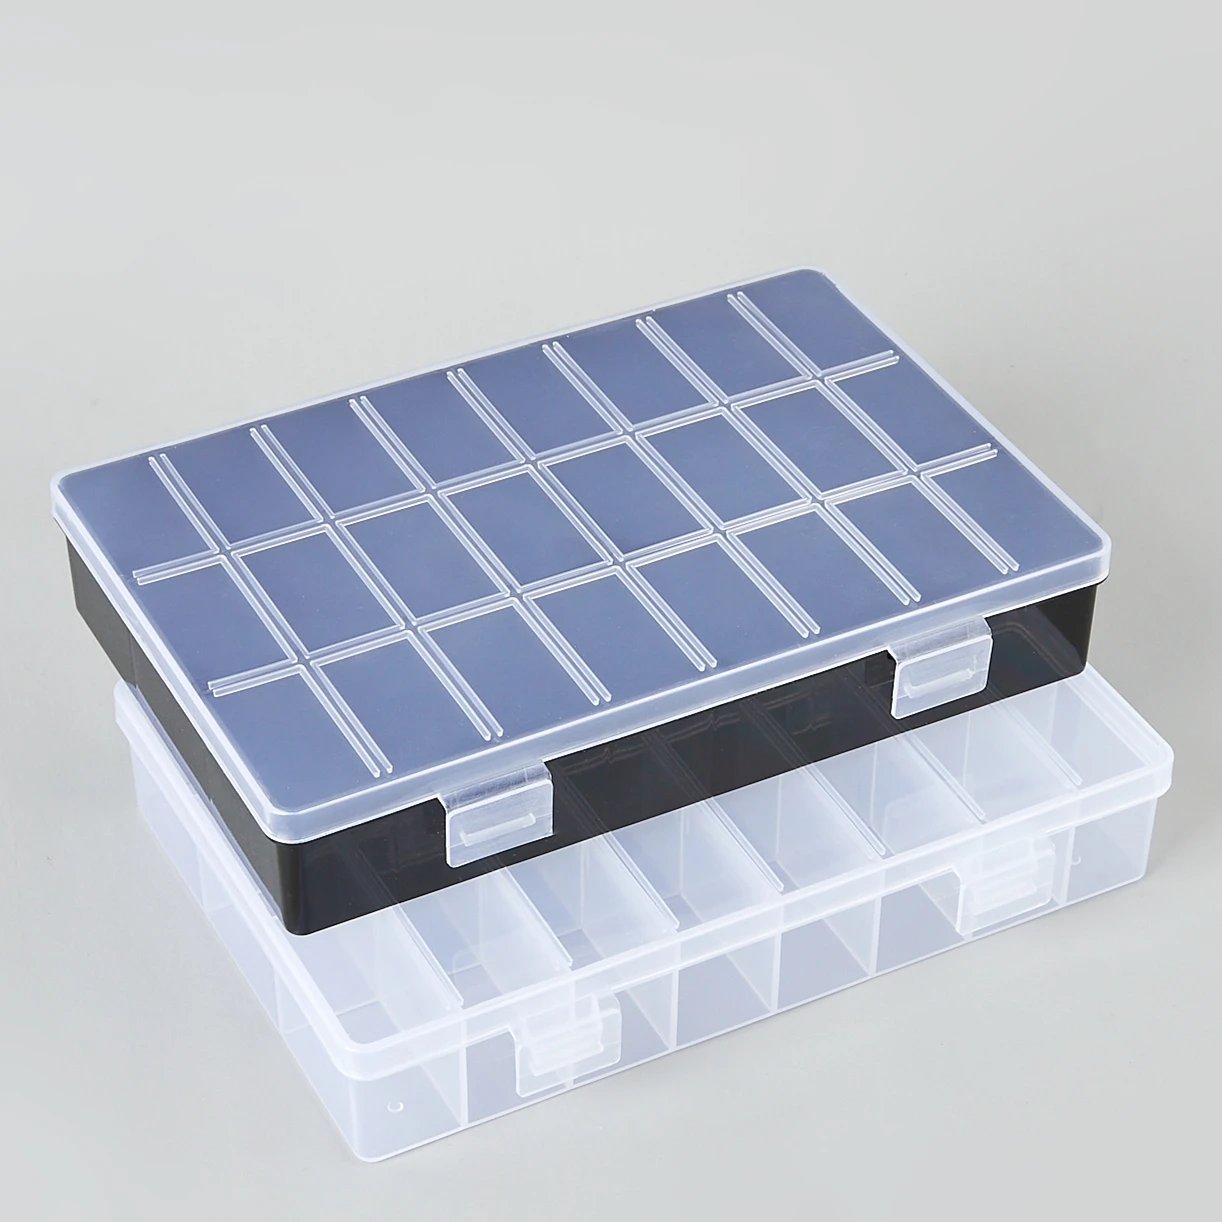 

Practical 24 Grids Compartment Plastic Storage Box Jewelry Earring Bead Screw Holder Case Display Organizer Container